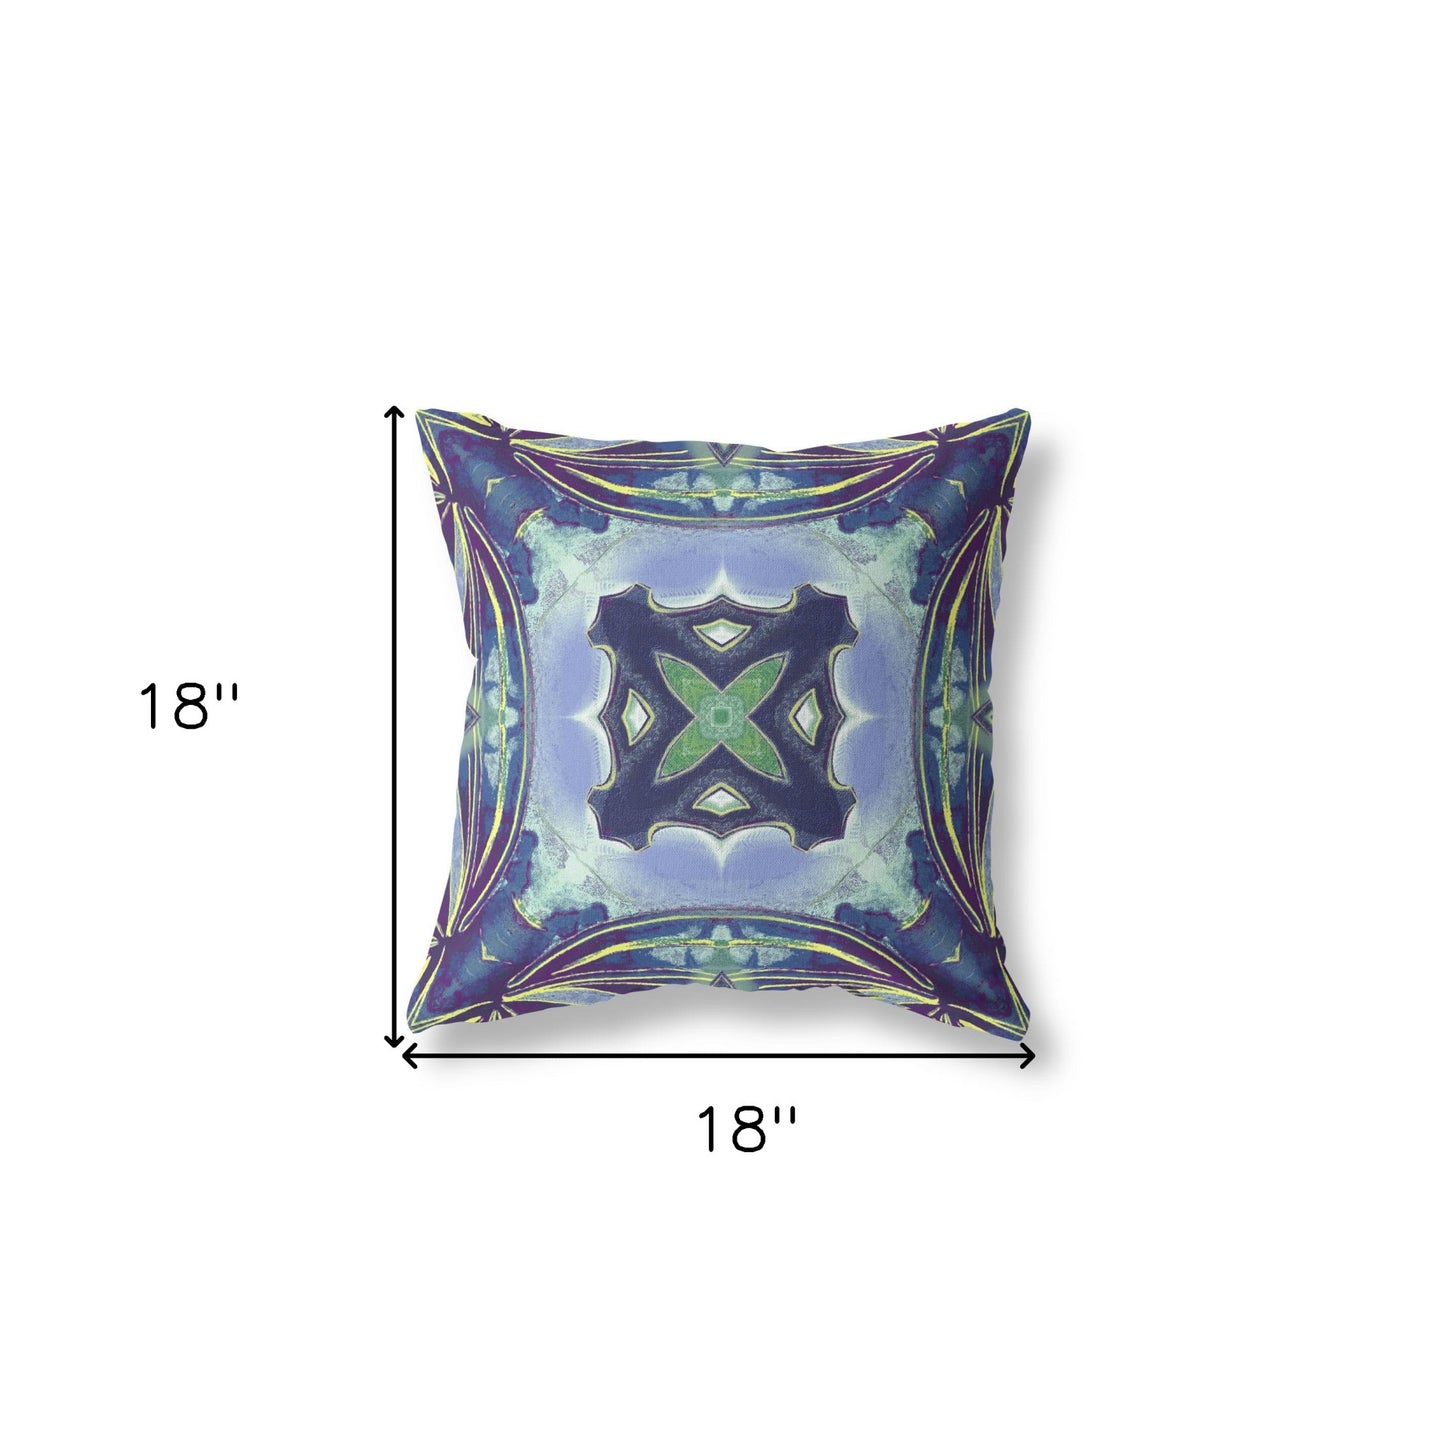 18" X 18" Peacock And Blue Zippered Geometric Indoor Outdoor Throw Pillow